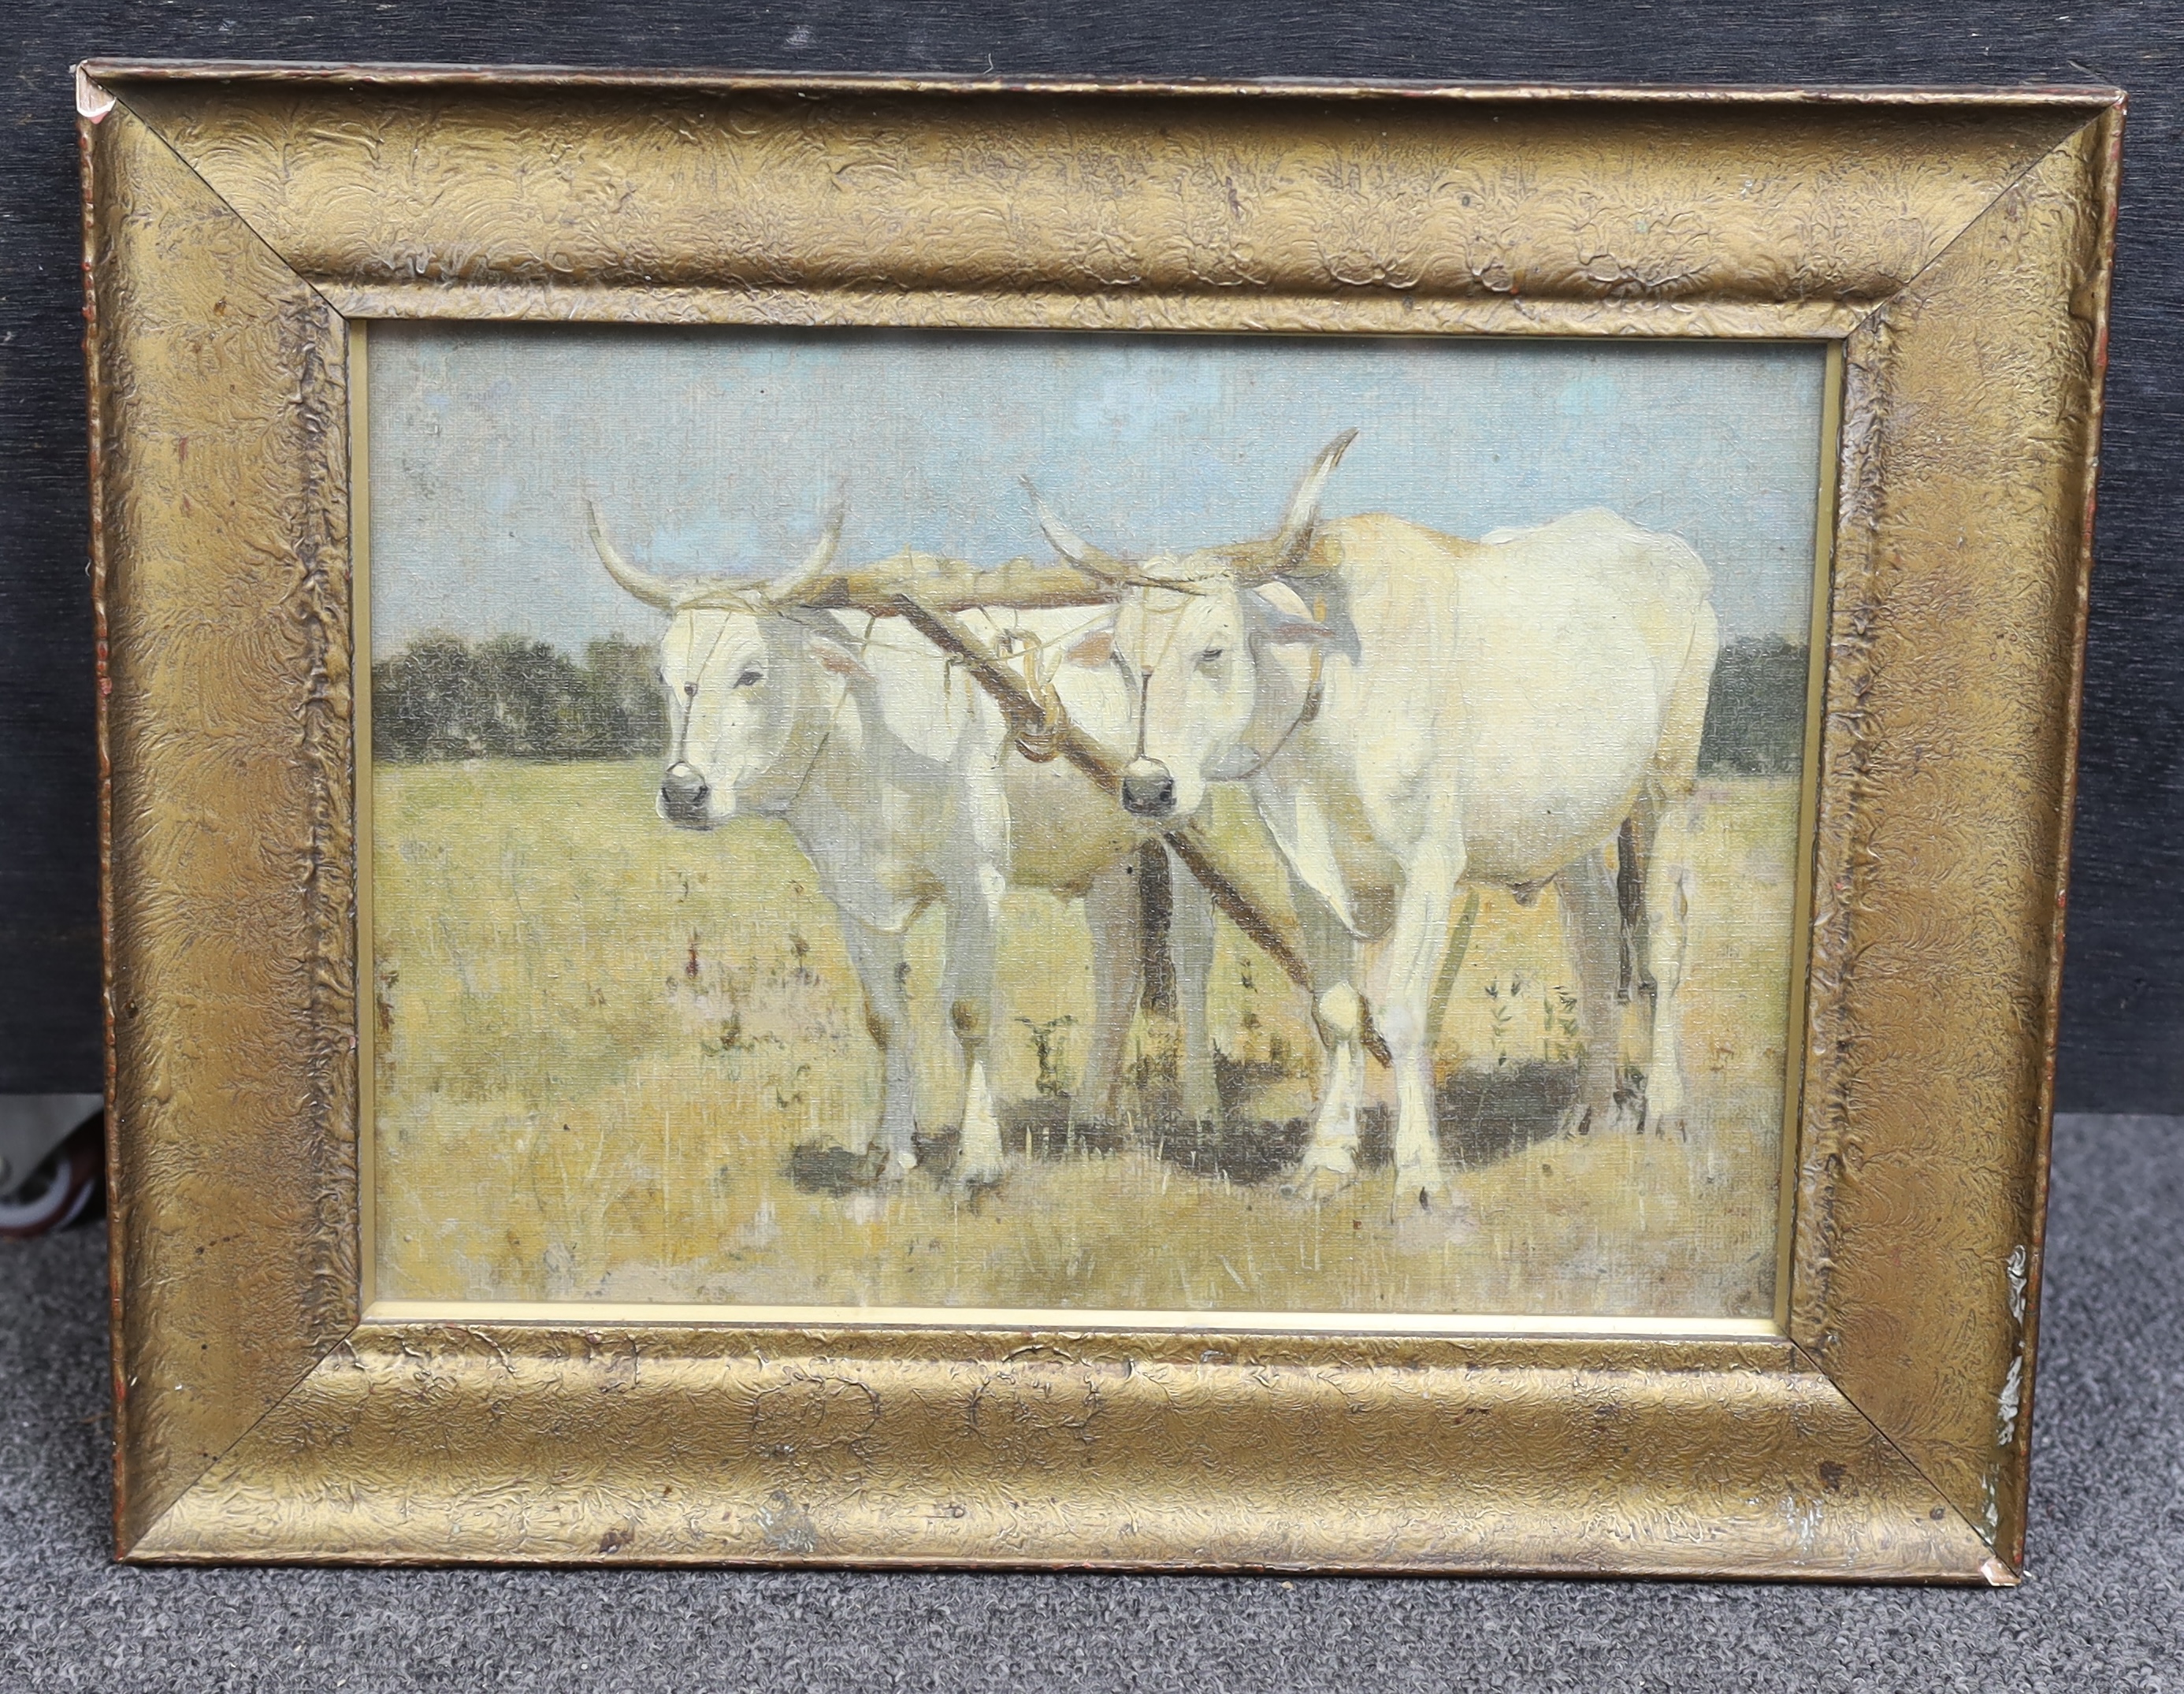 Arthur Lemon (1850-1912), oil on canvas board, White oxen in ploughing harness, unsigned, 20 x 29cm. Condition - fair